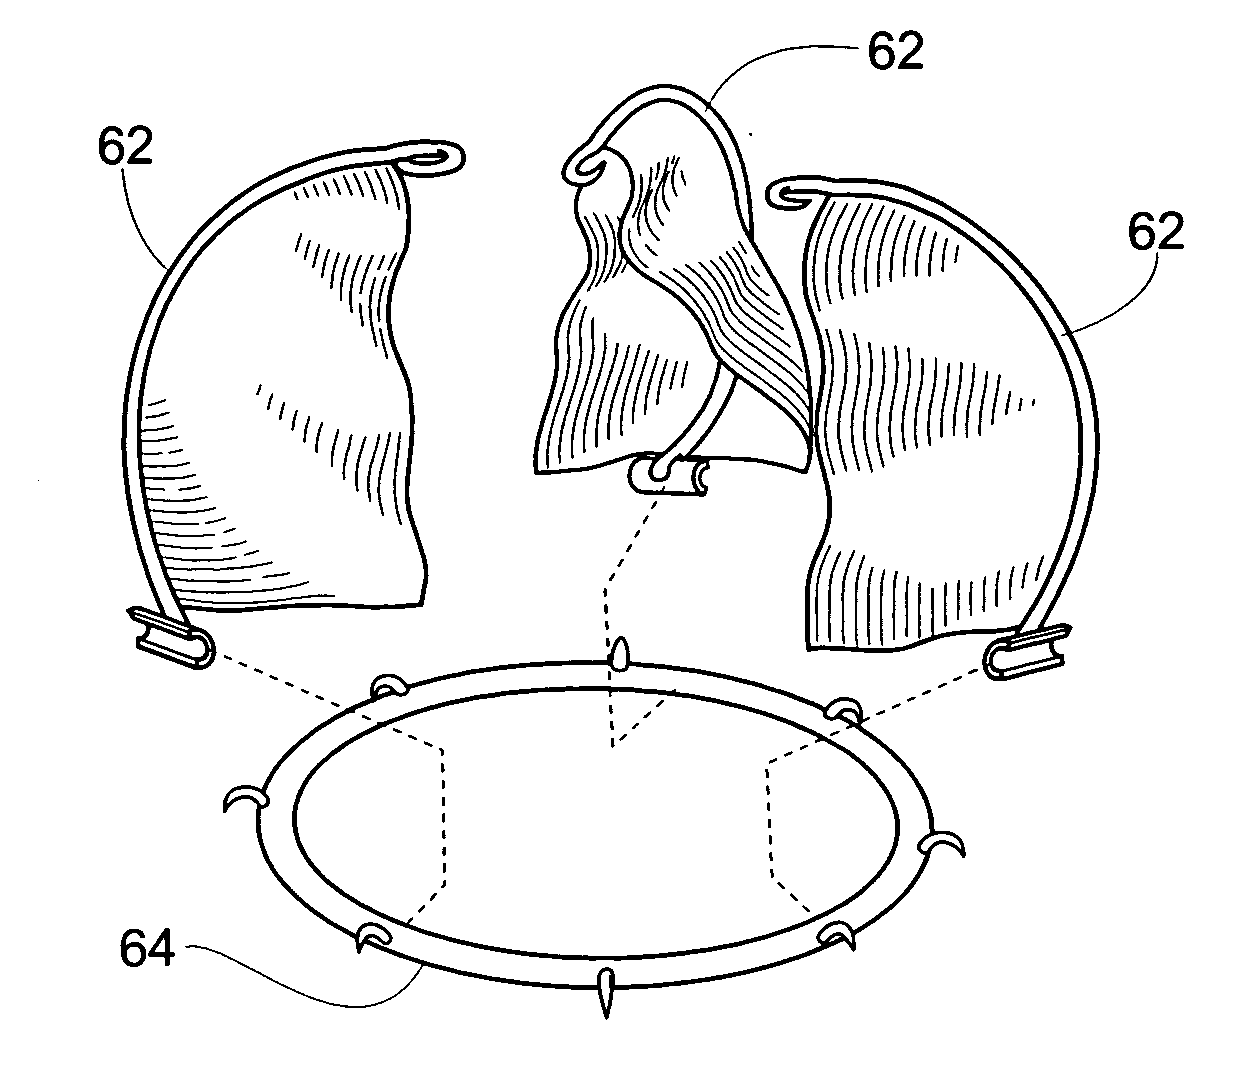 Suspended heart valve devices, systems, and methods for supplementing, repairing, or replacing a native heart valve